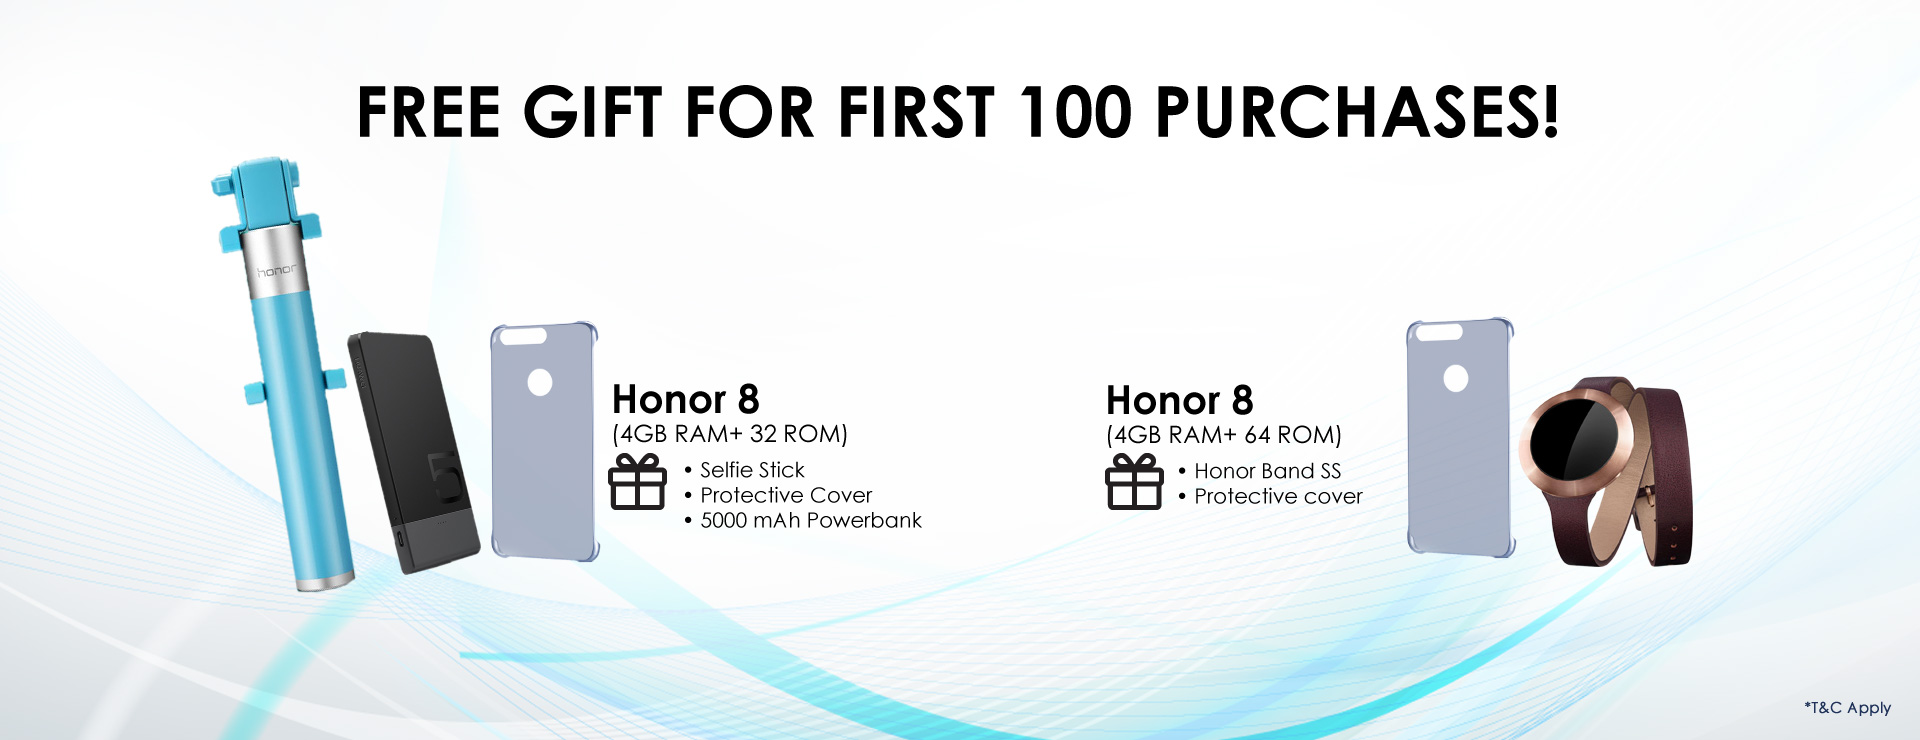 Purchase the Honor 8 on the 8th with freebies